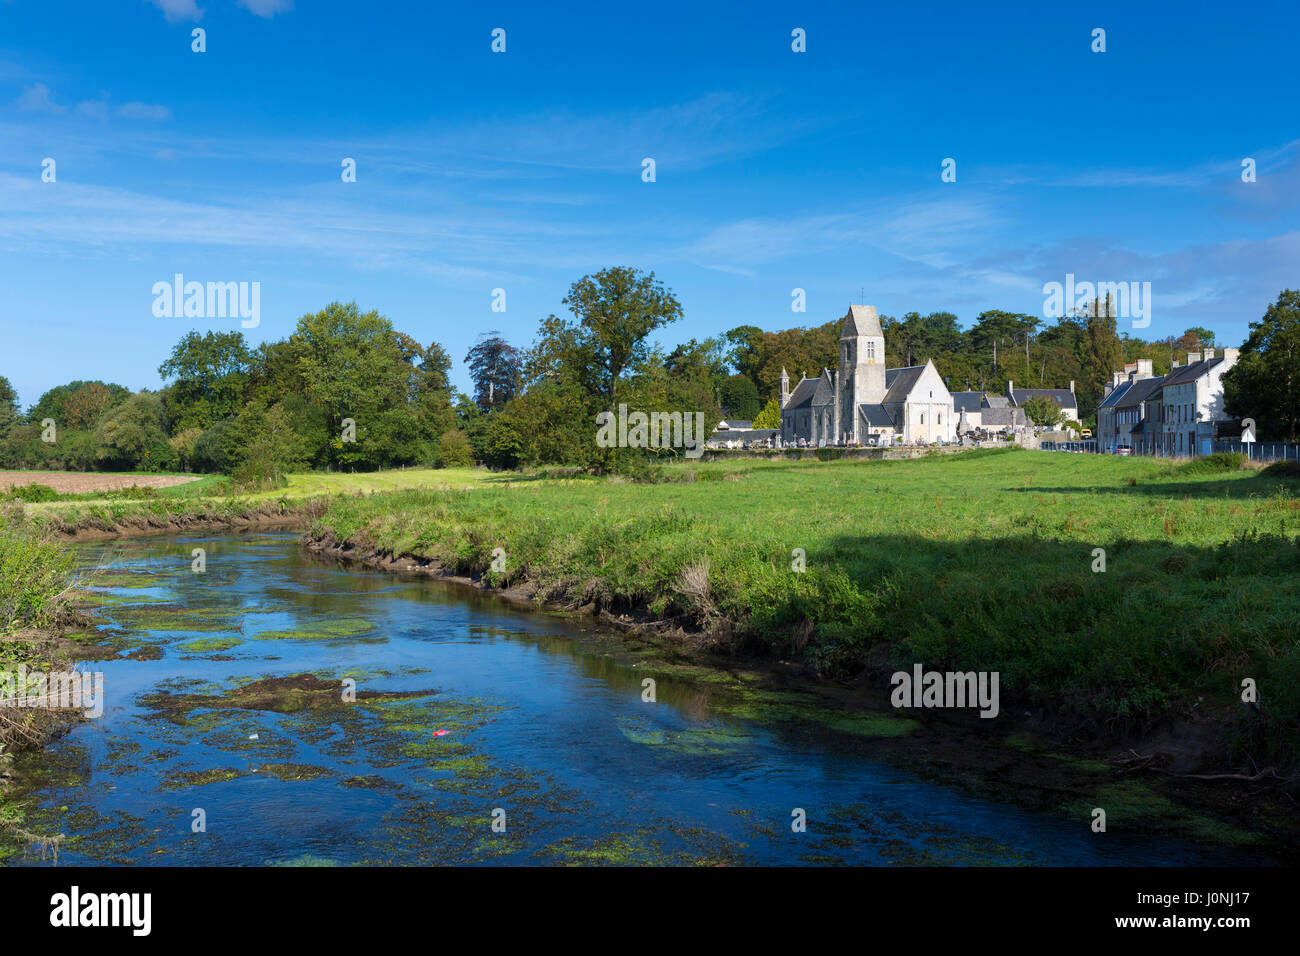 Ancient typical Norman church by the river at Vaux-sur-Aure in Normandy Stock Photo